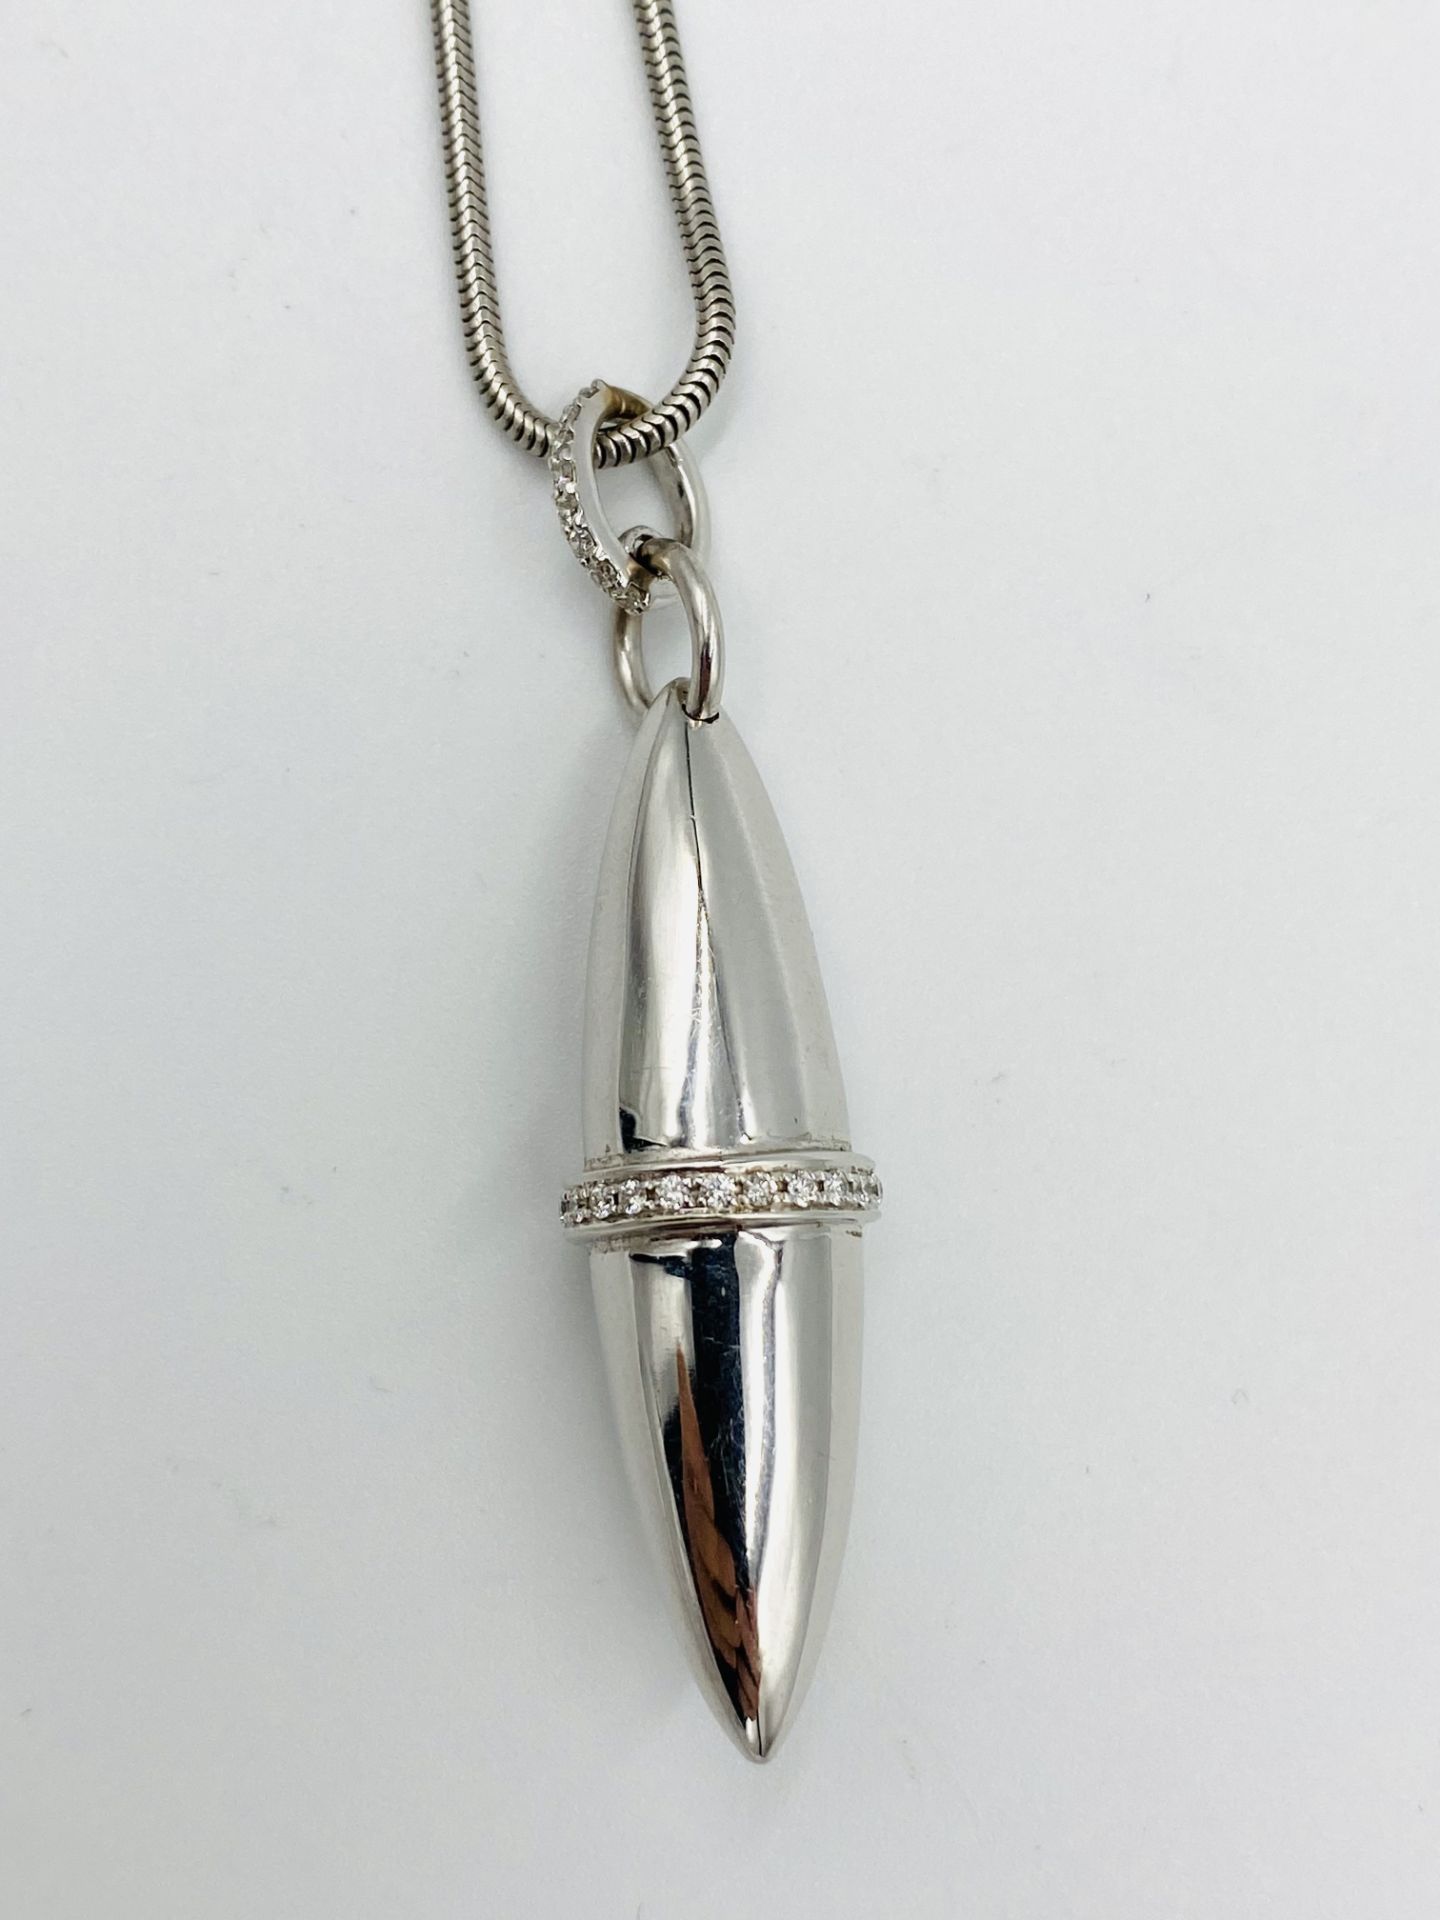 Boodles diamond pendant on white gold chain - Image 2 of 6